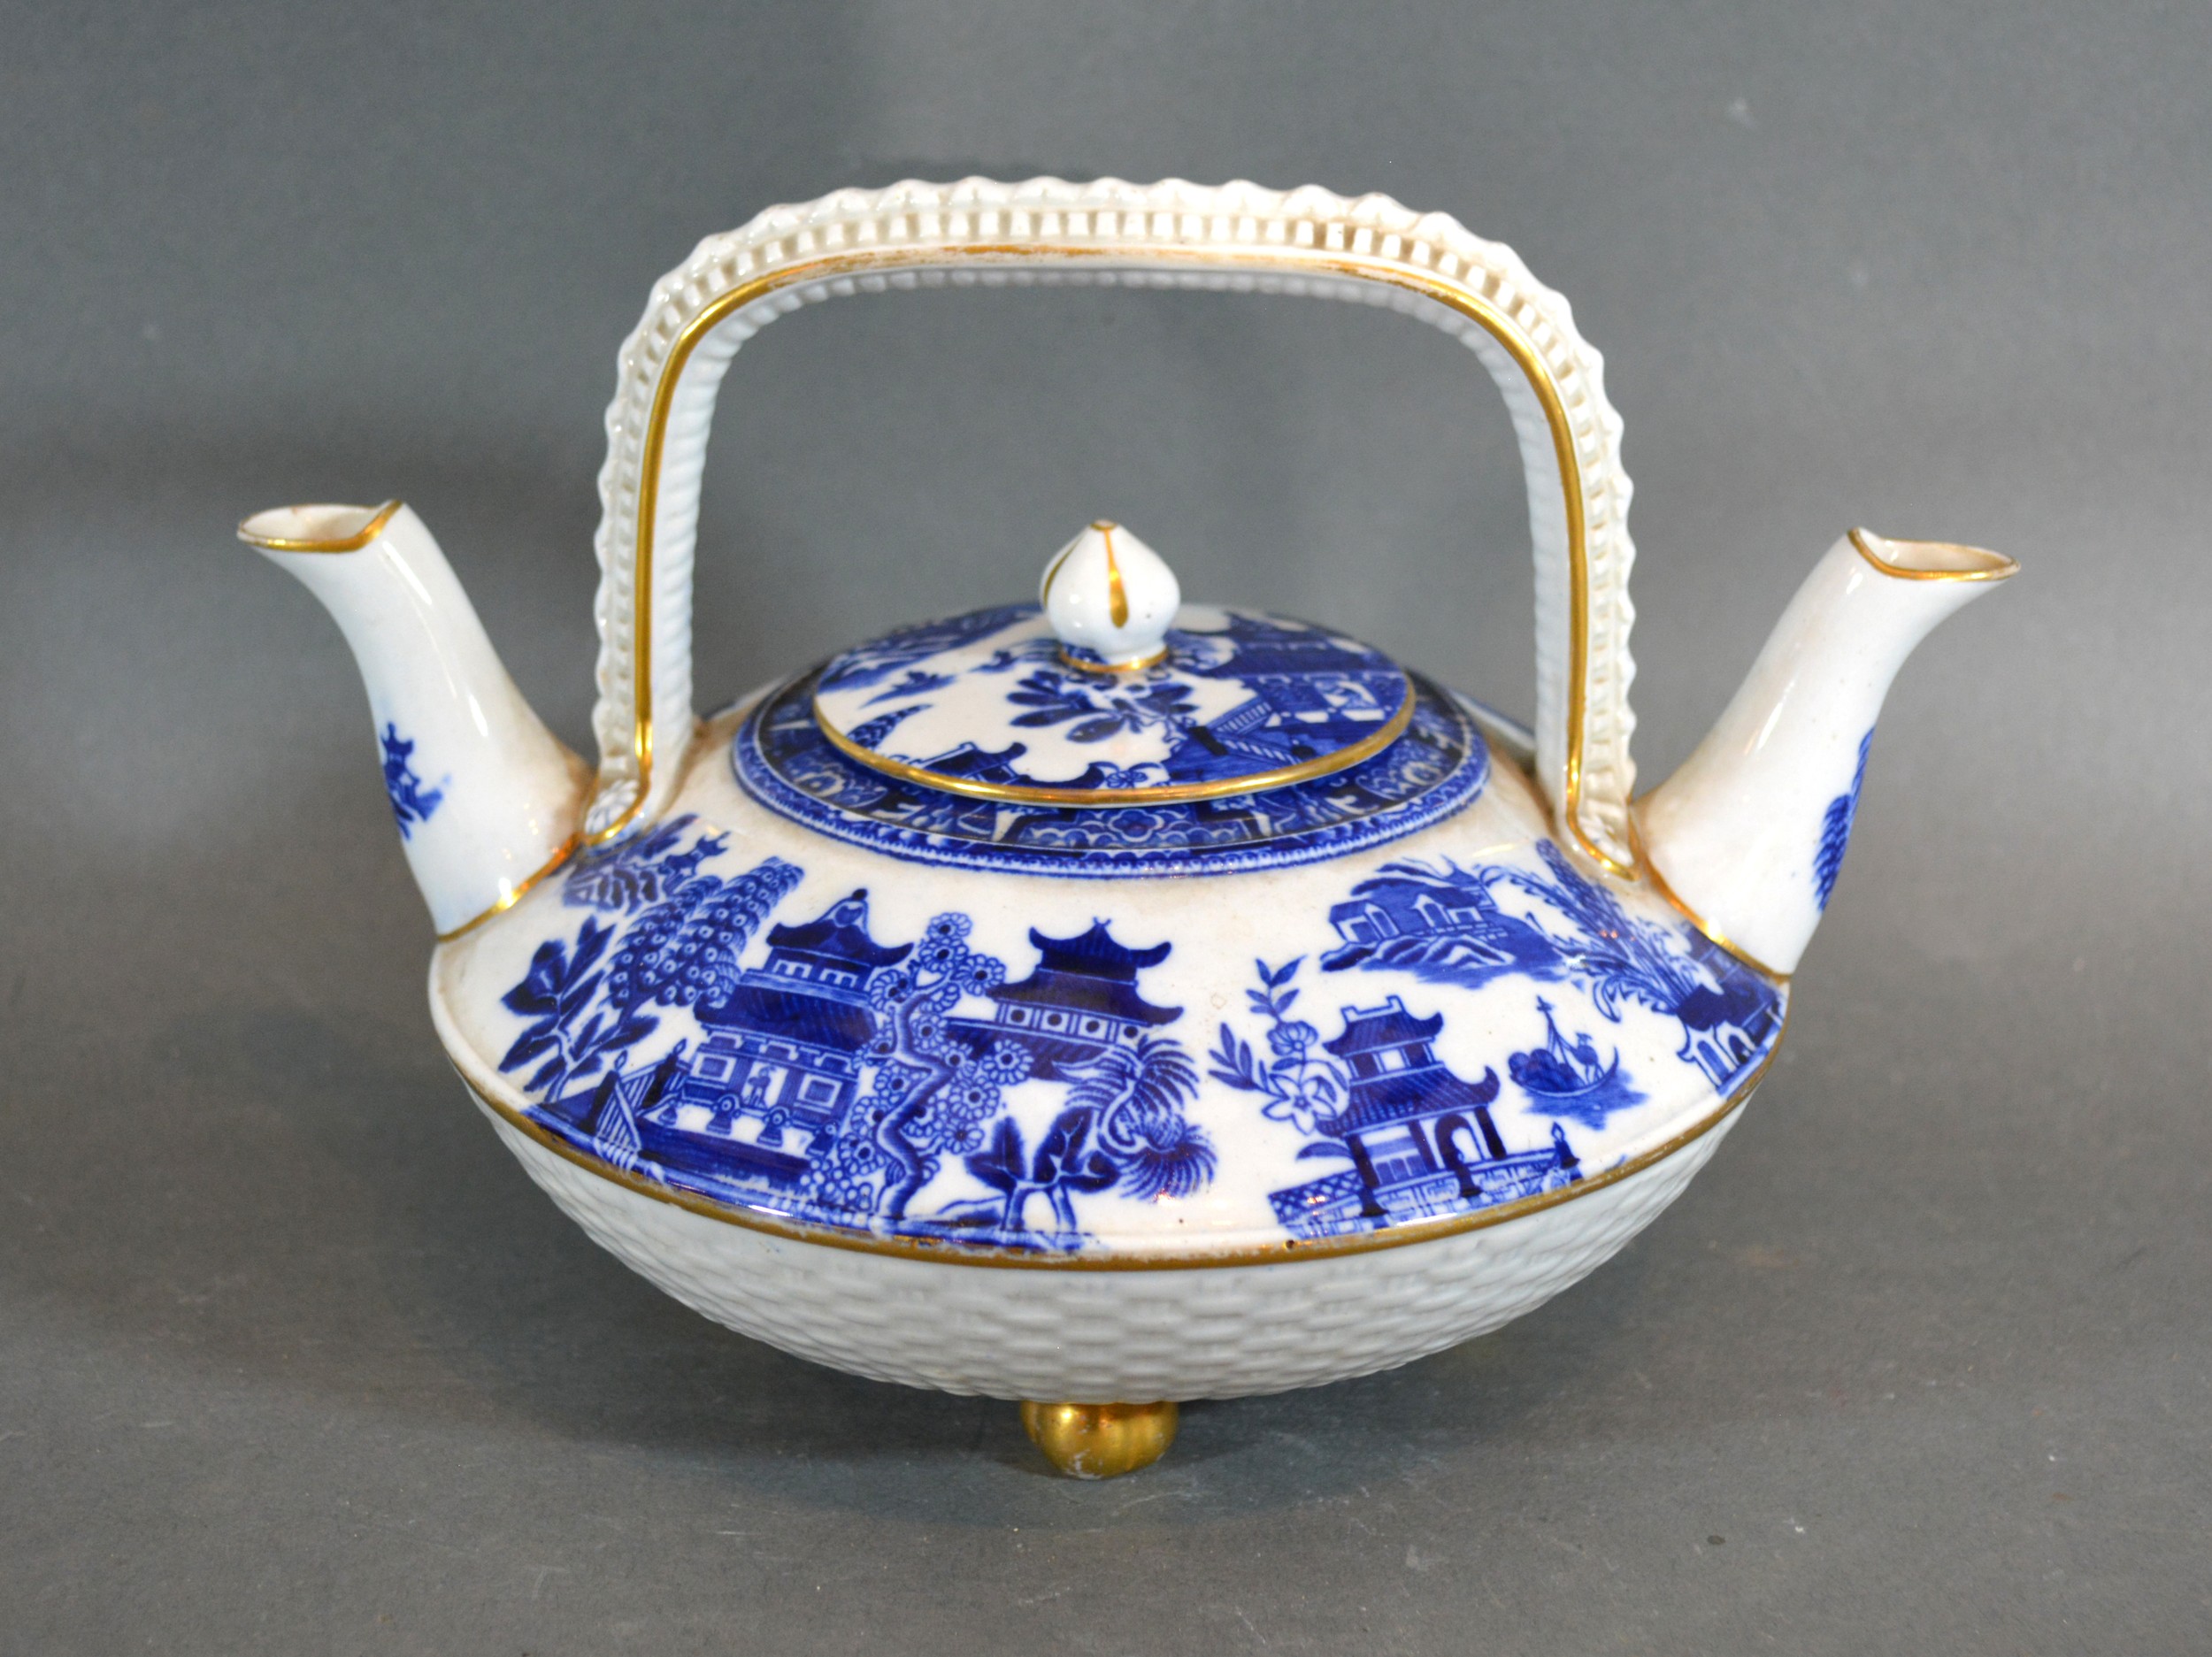 A 19th Century Worcester Double Spouted Teapot decorated in underglaze blue and with gilded feet